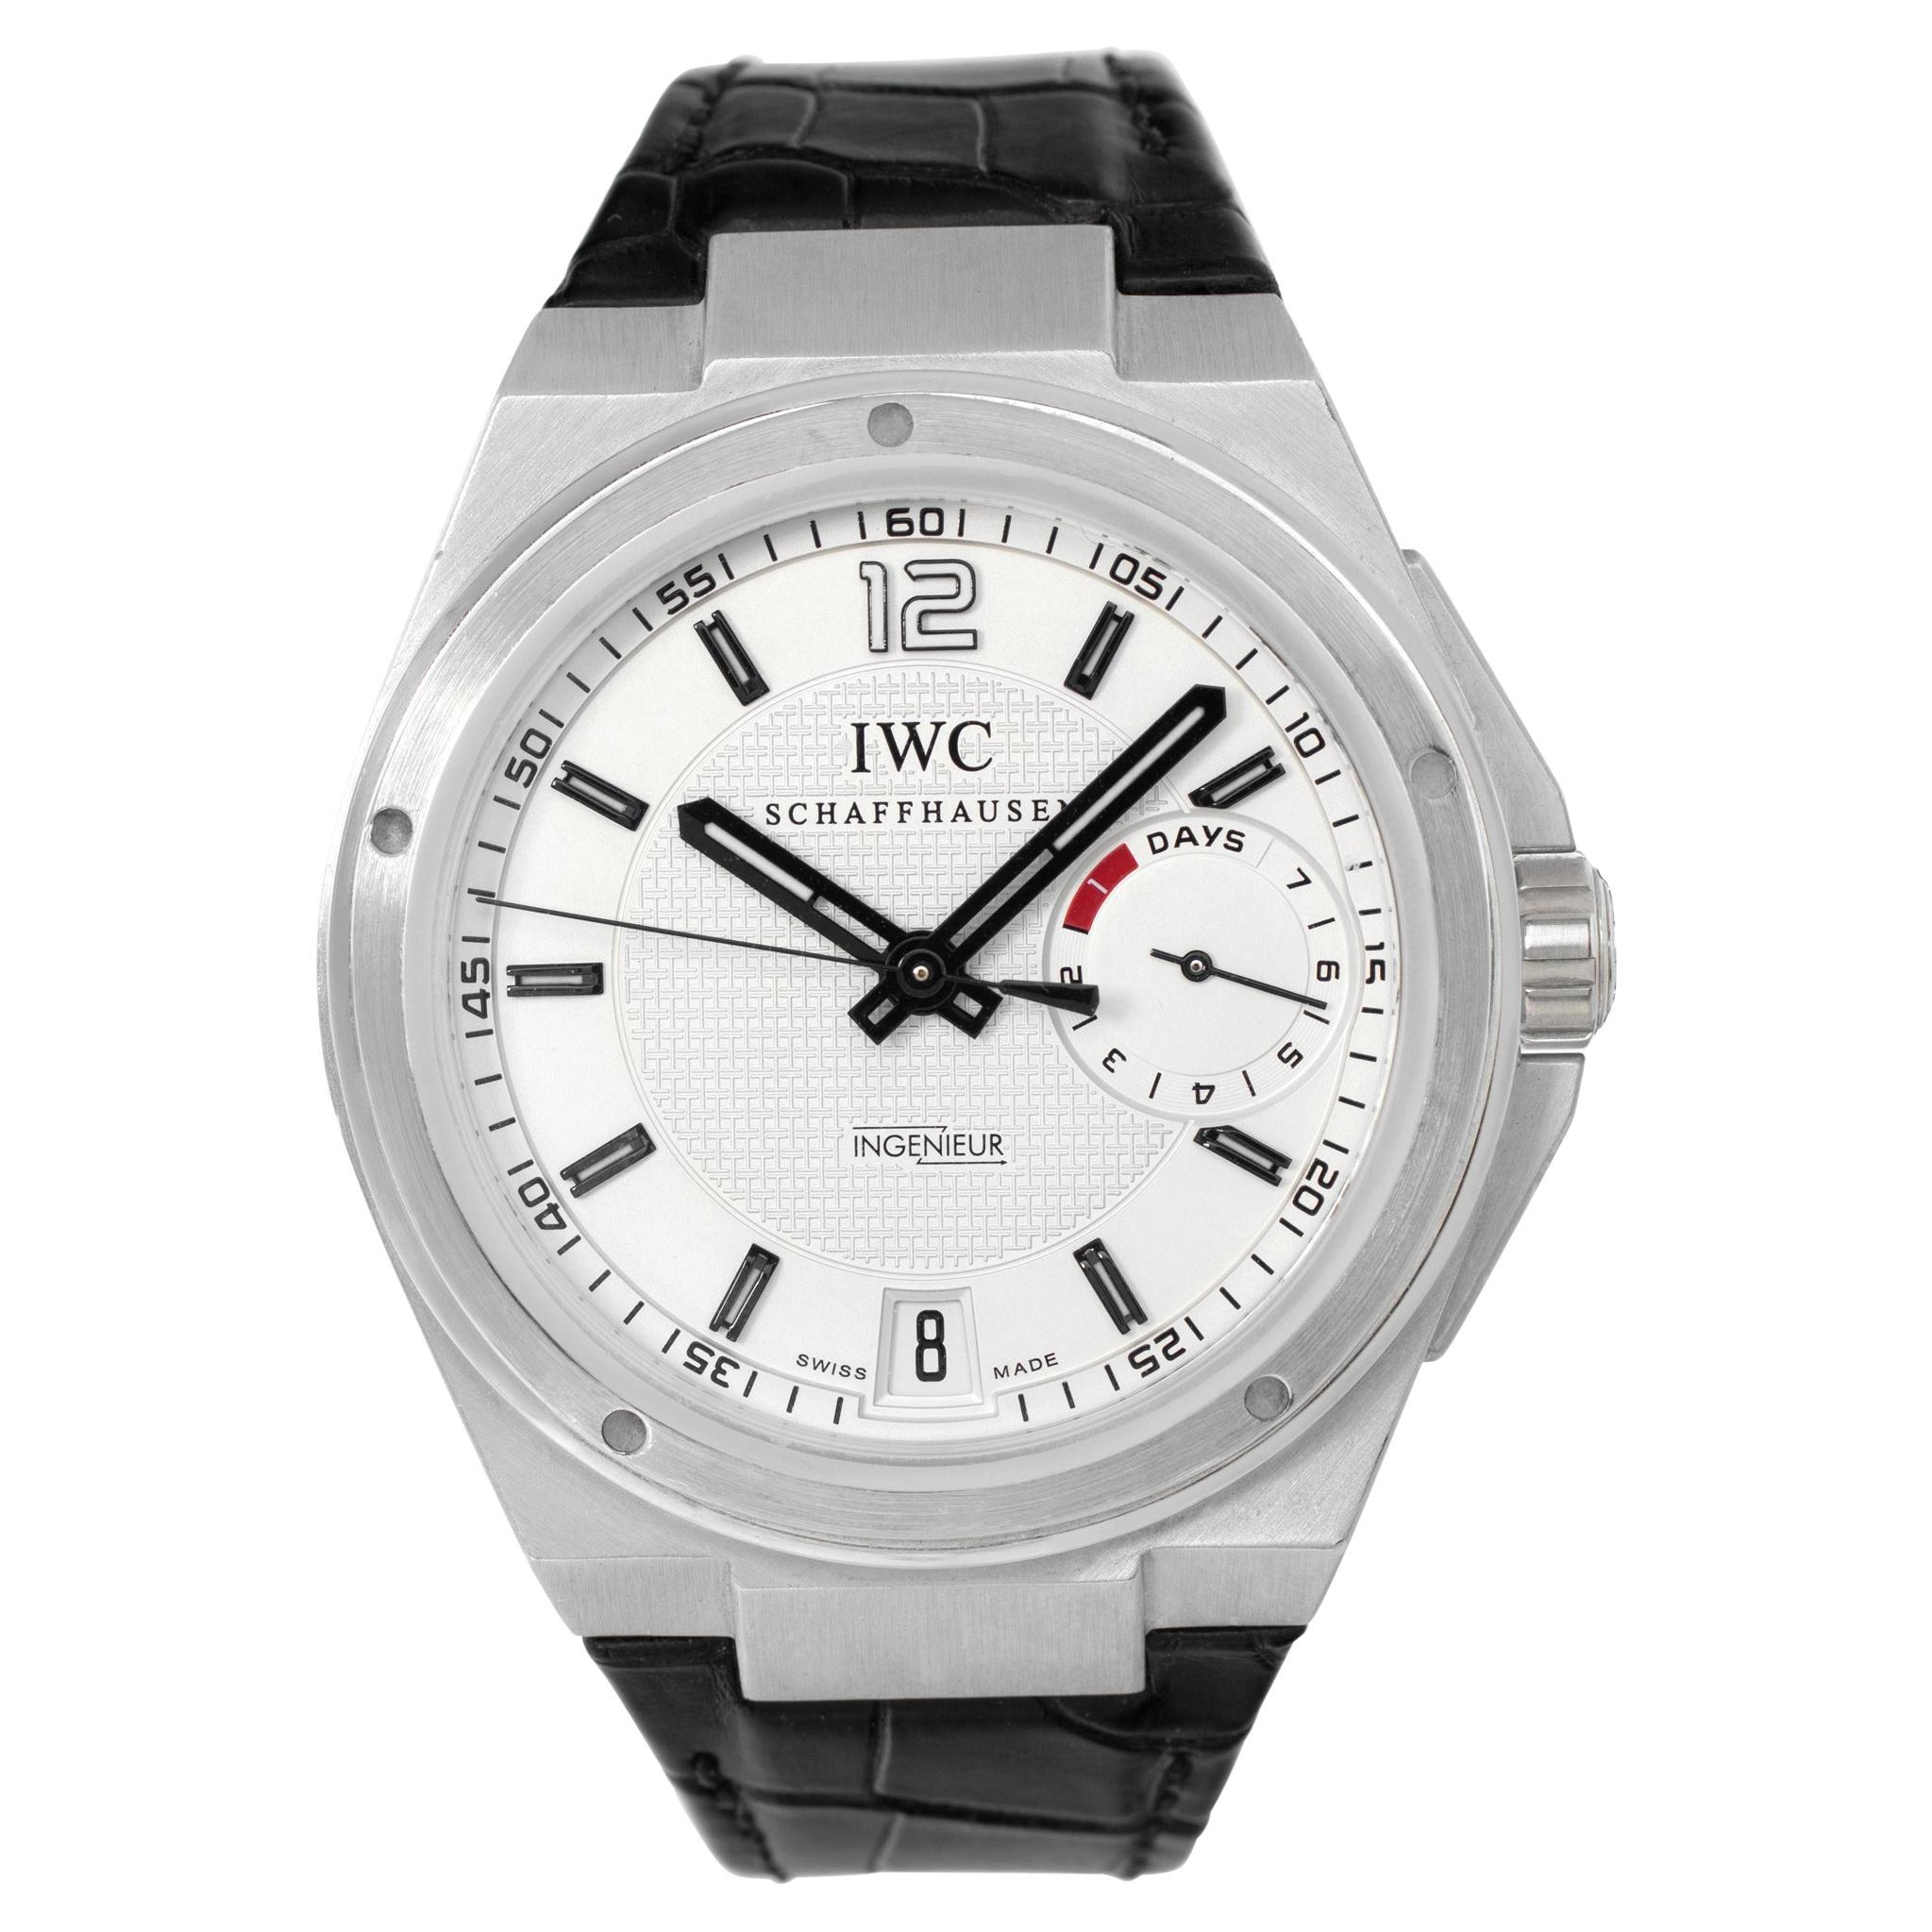 IWC Ingenieur IW500502 in Platinum with a Silver dial 45mm Automatic watch